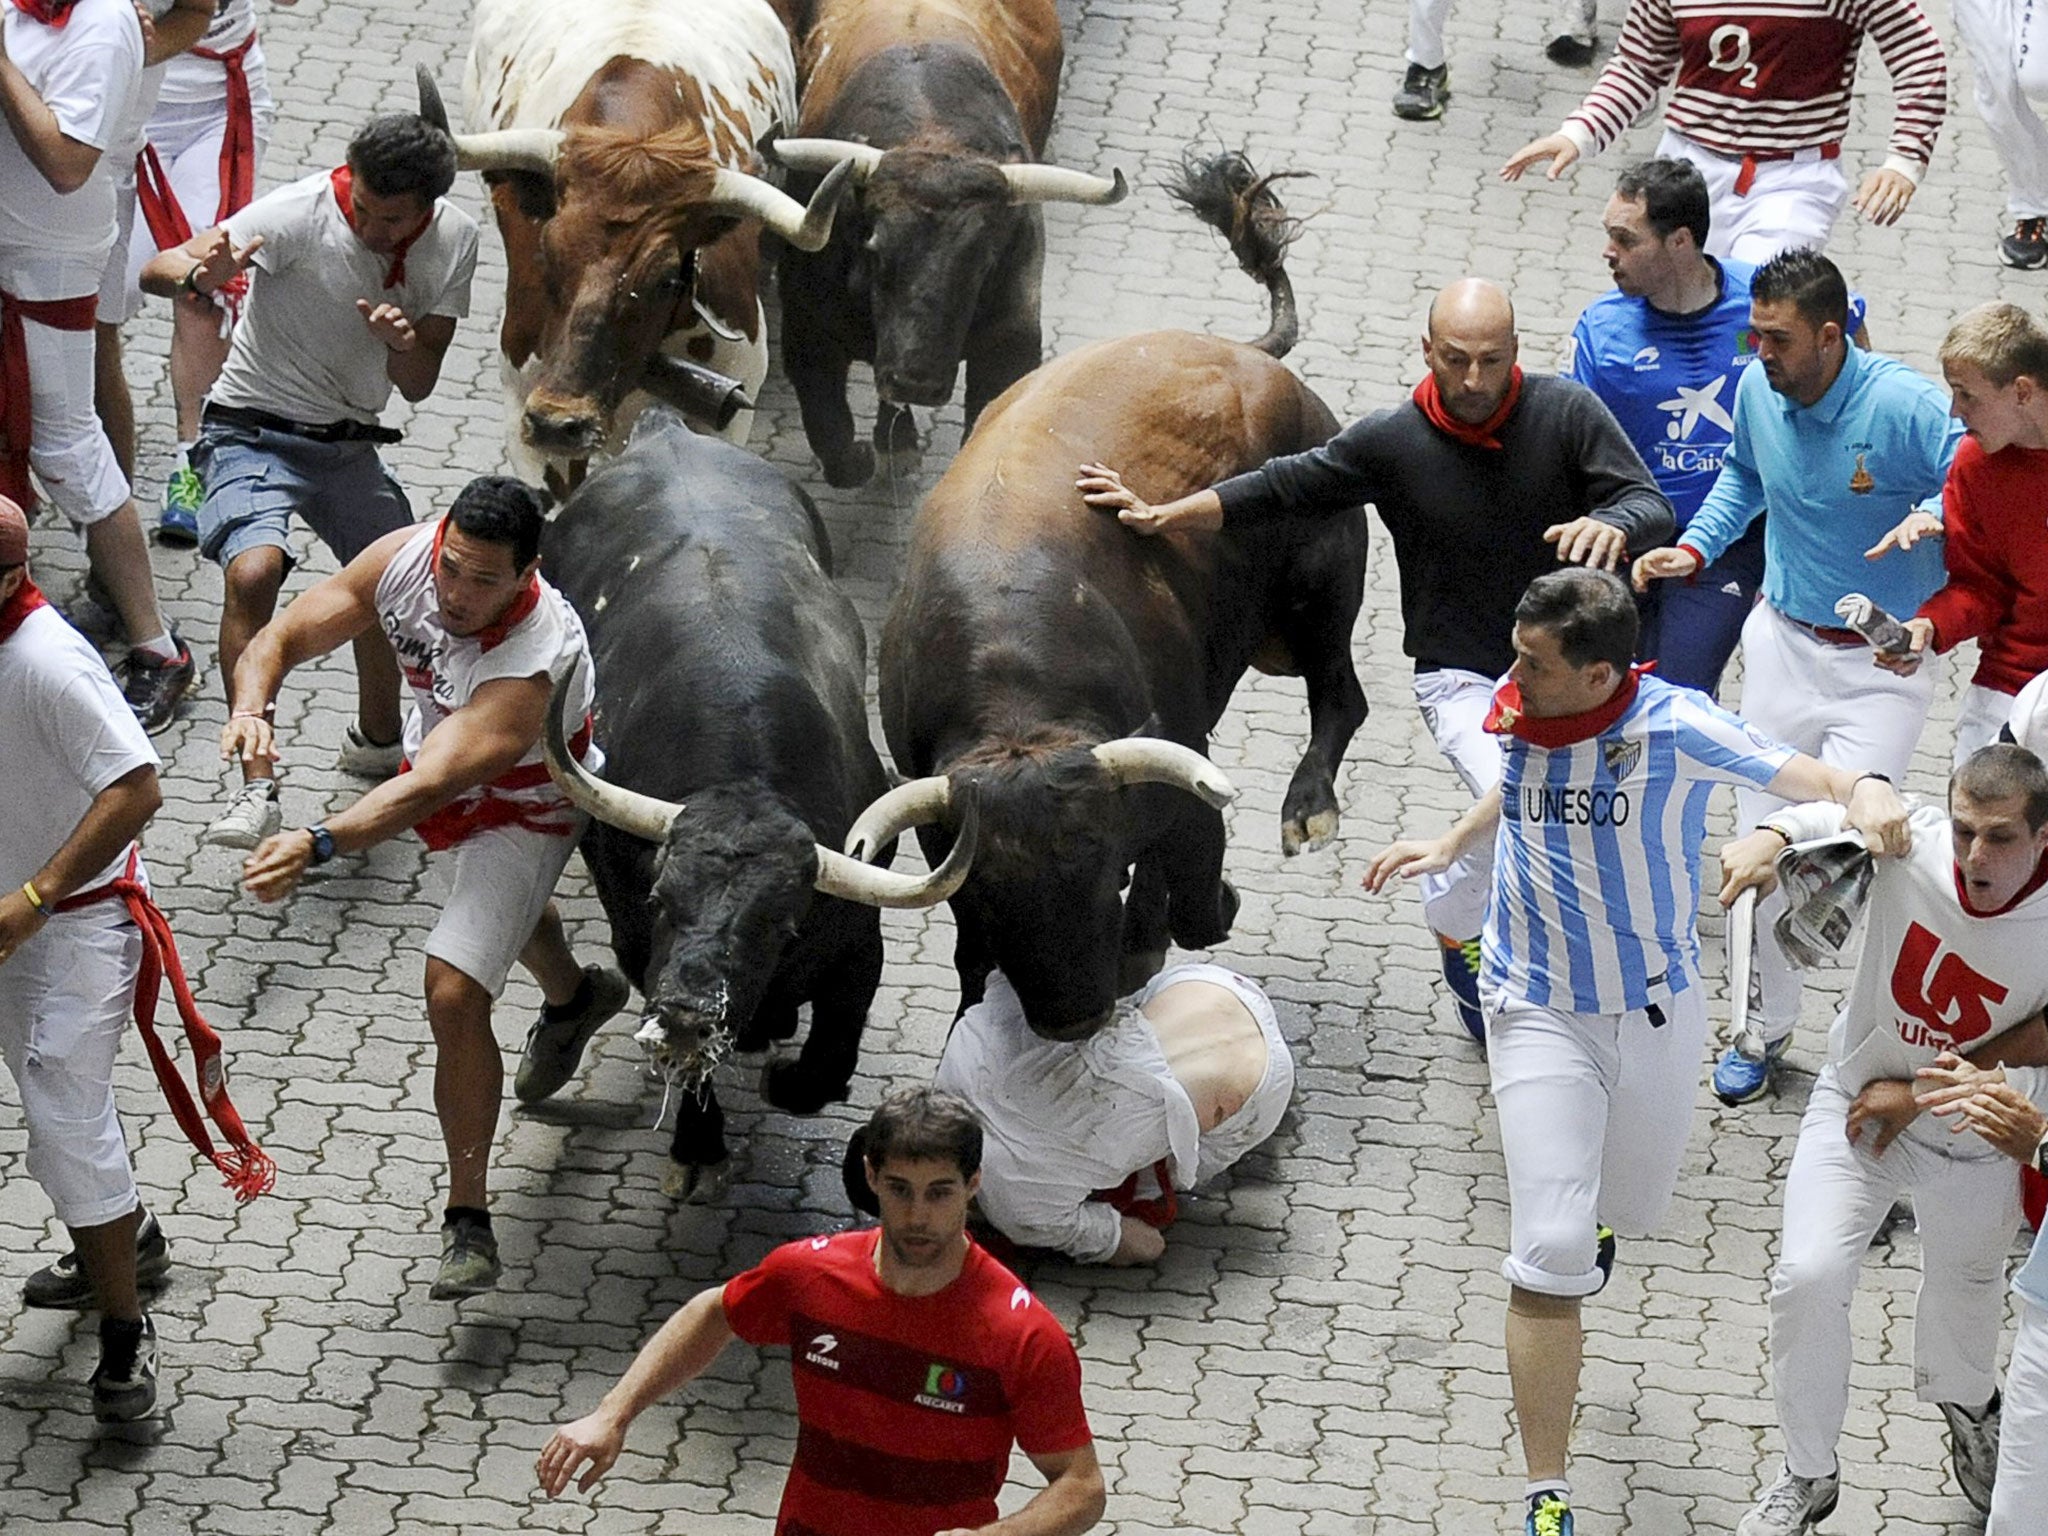 A runner falls in front of fighting bulls